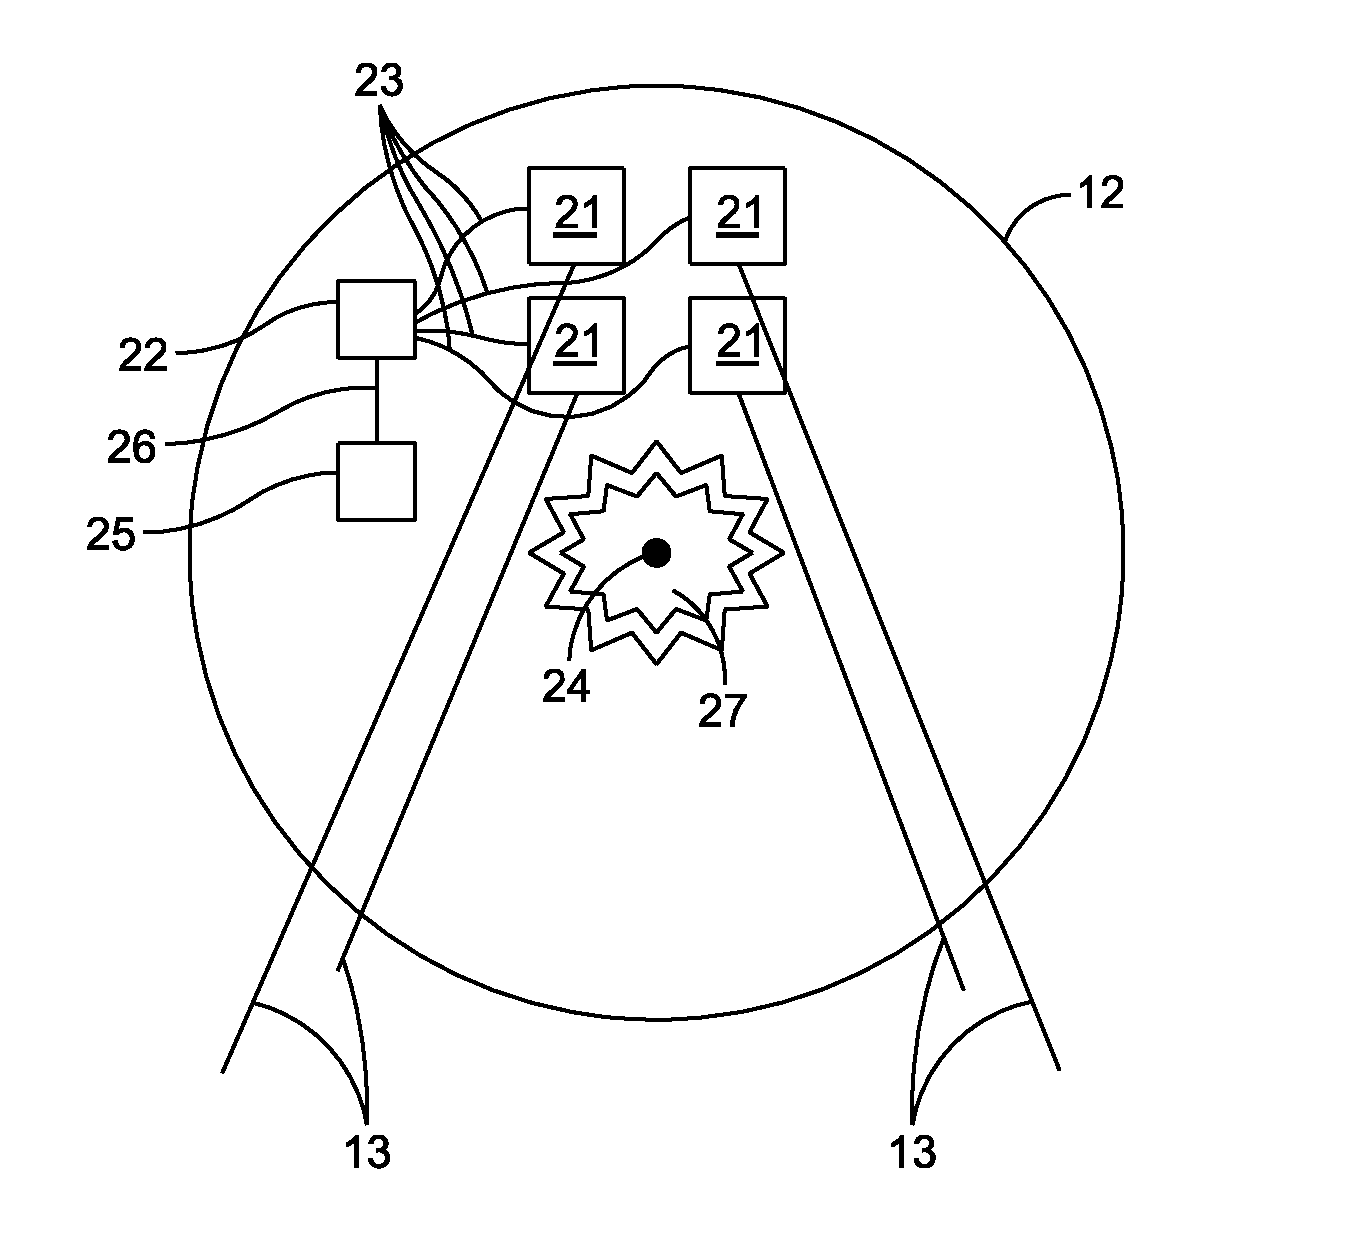 Systems and methods for attitude control of tethered aerostats